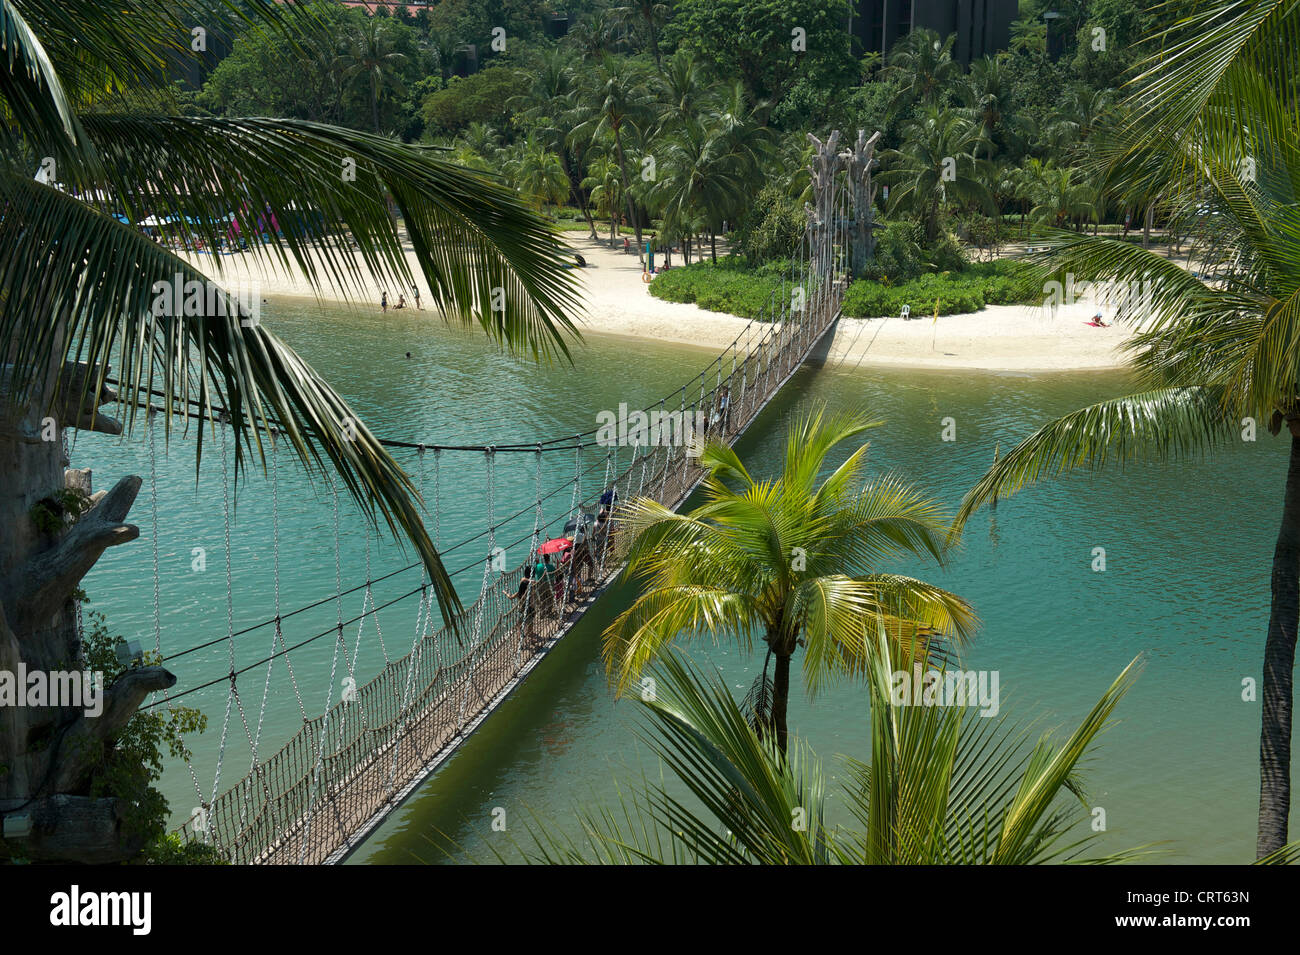 Swinging foot bridge linking Palawan beach on Sentosa island to the southernmost point of continental Asia, Singapore Stock Photo